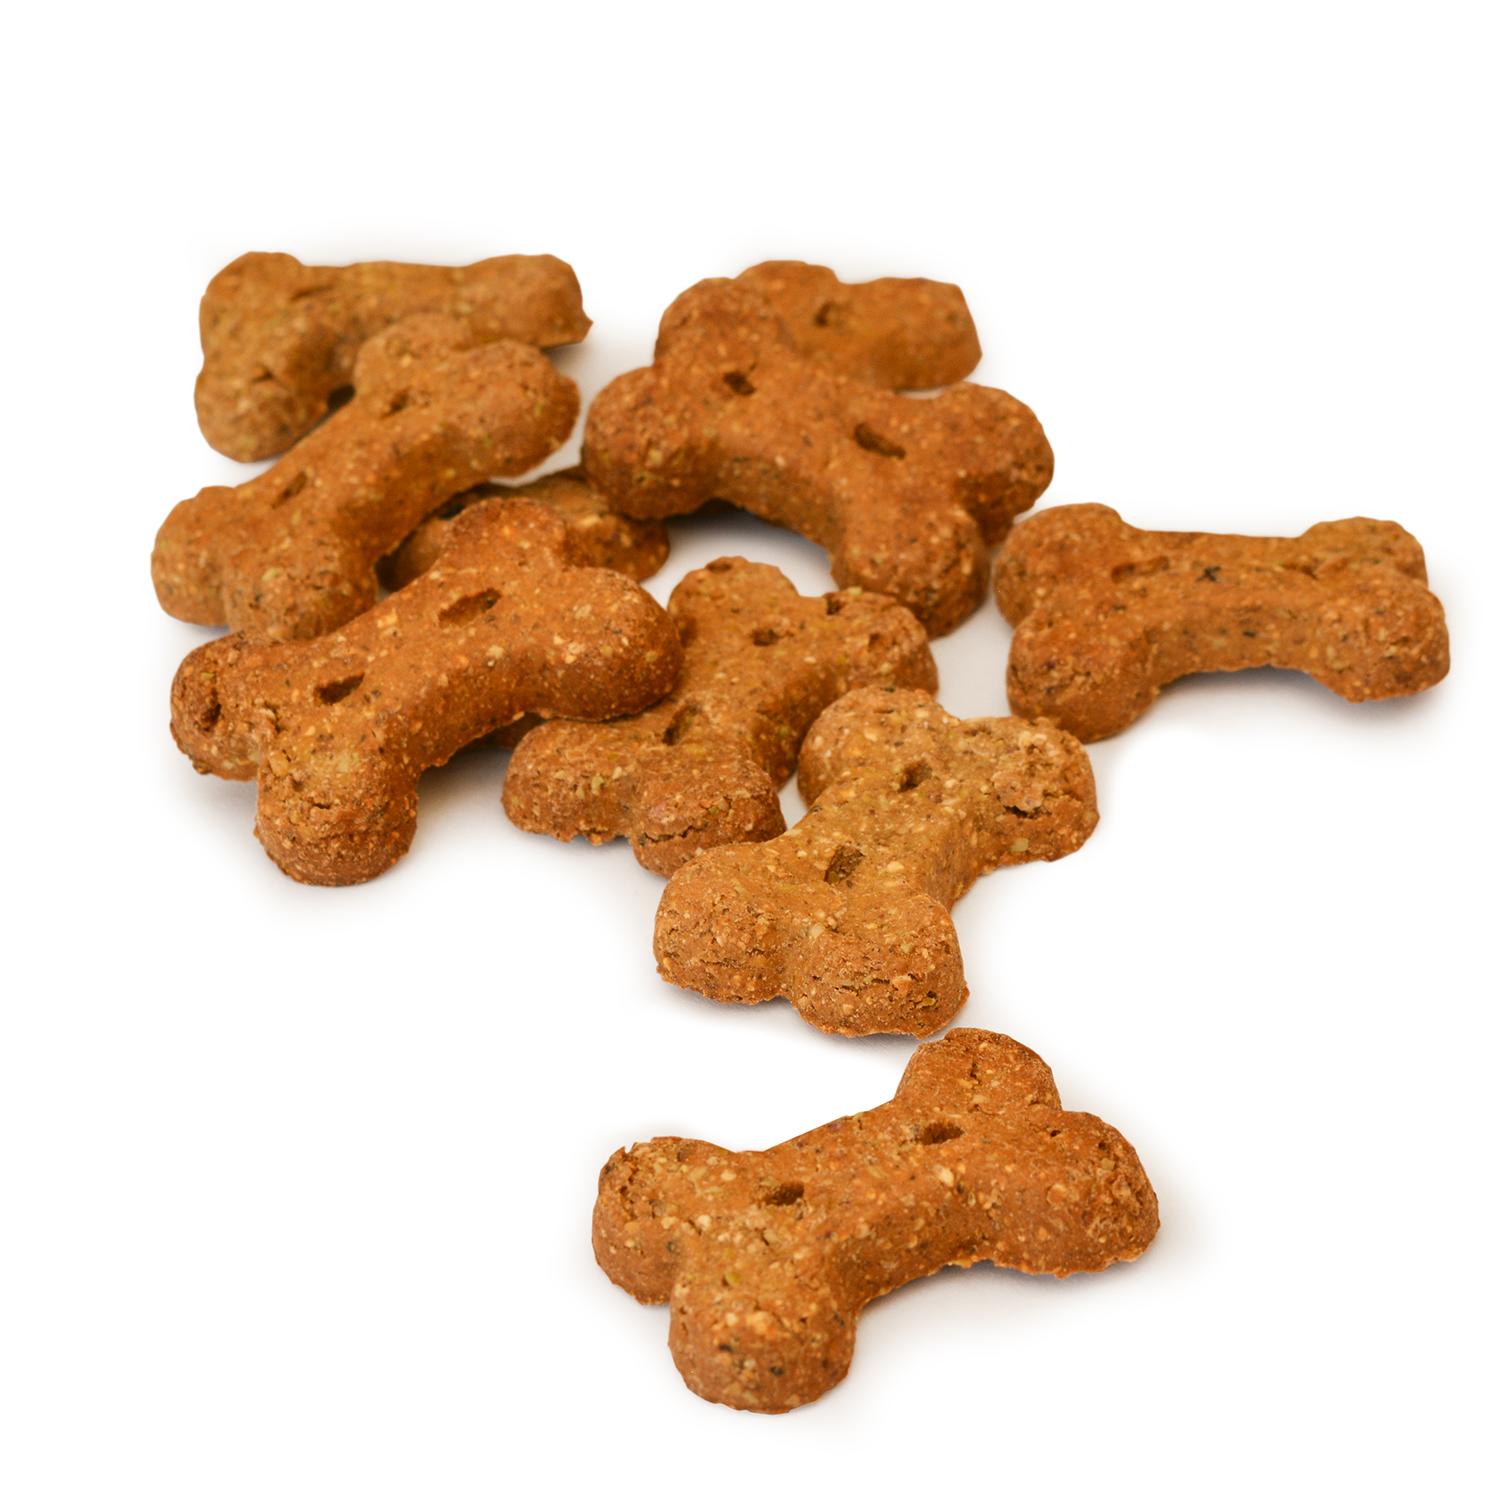 Bone Shaped Vegan Dog Biscuits out of the pack